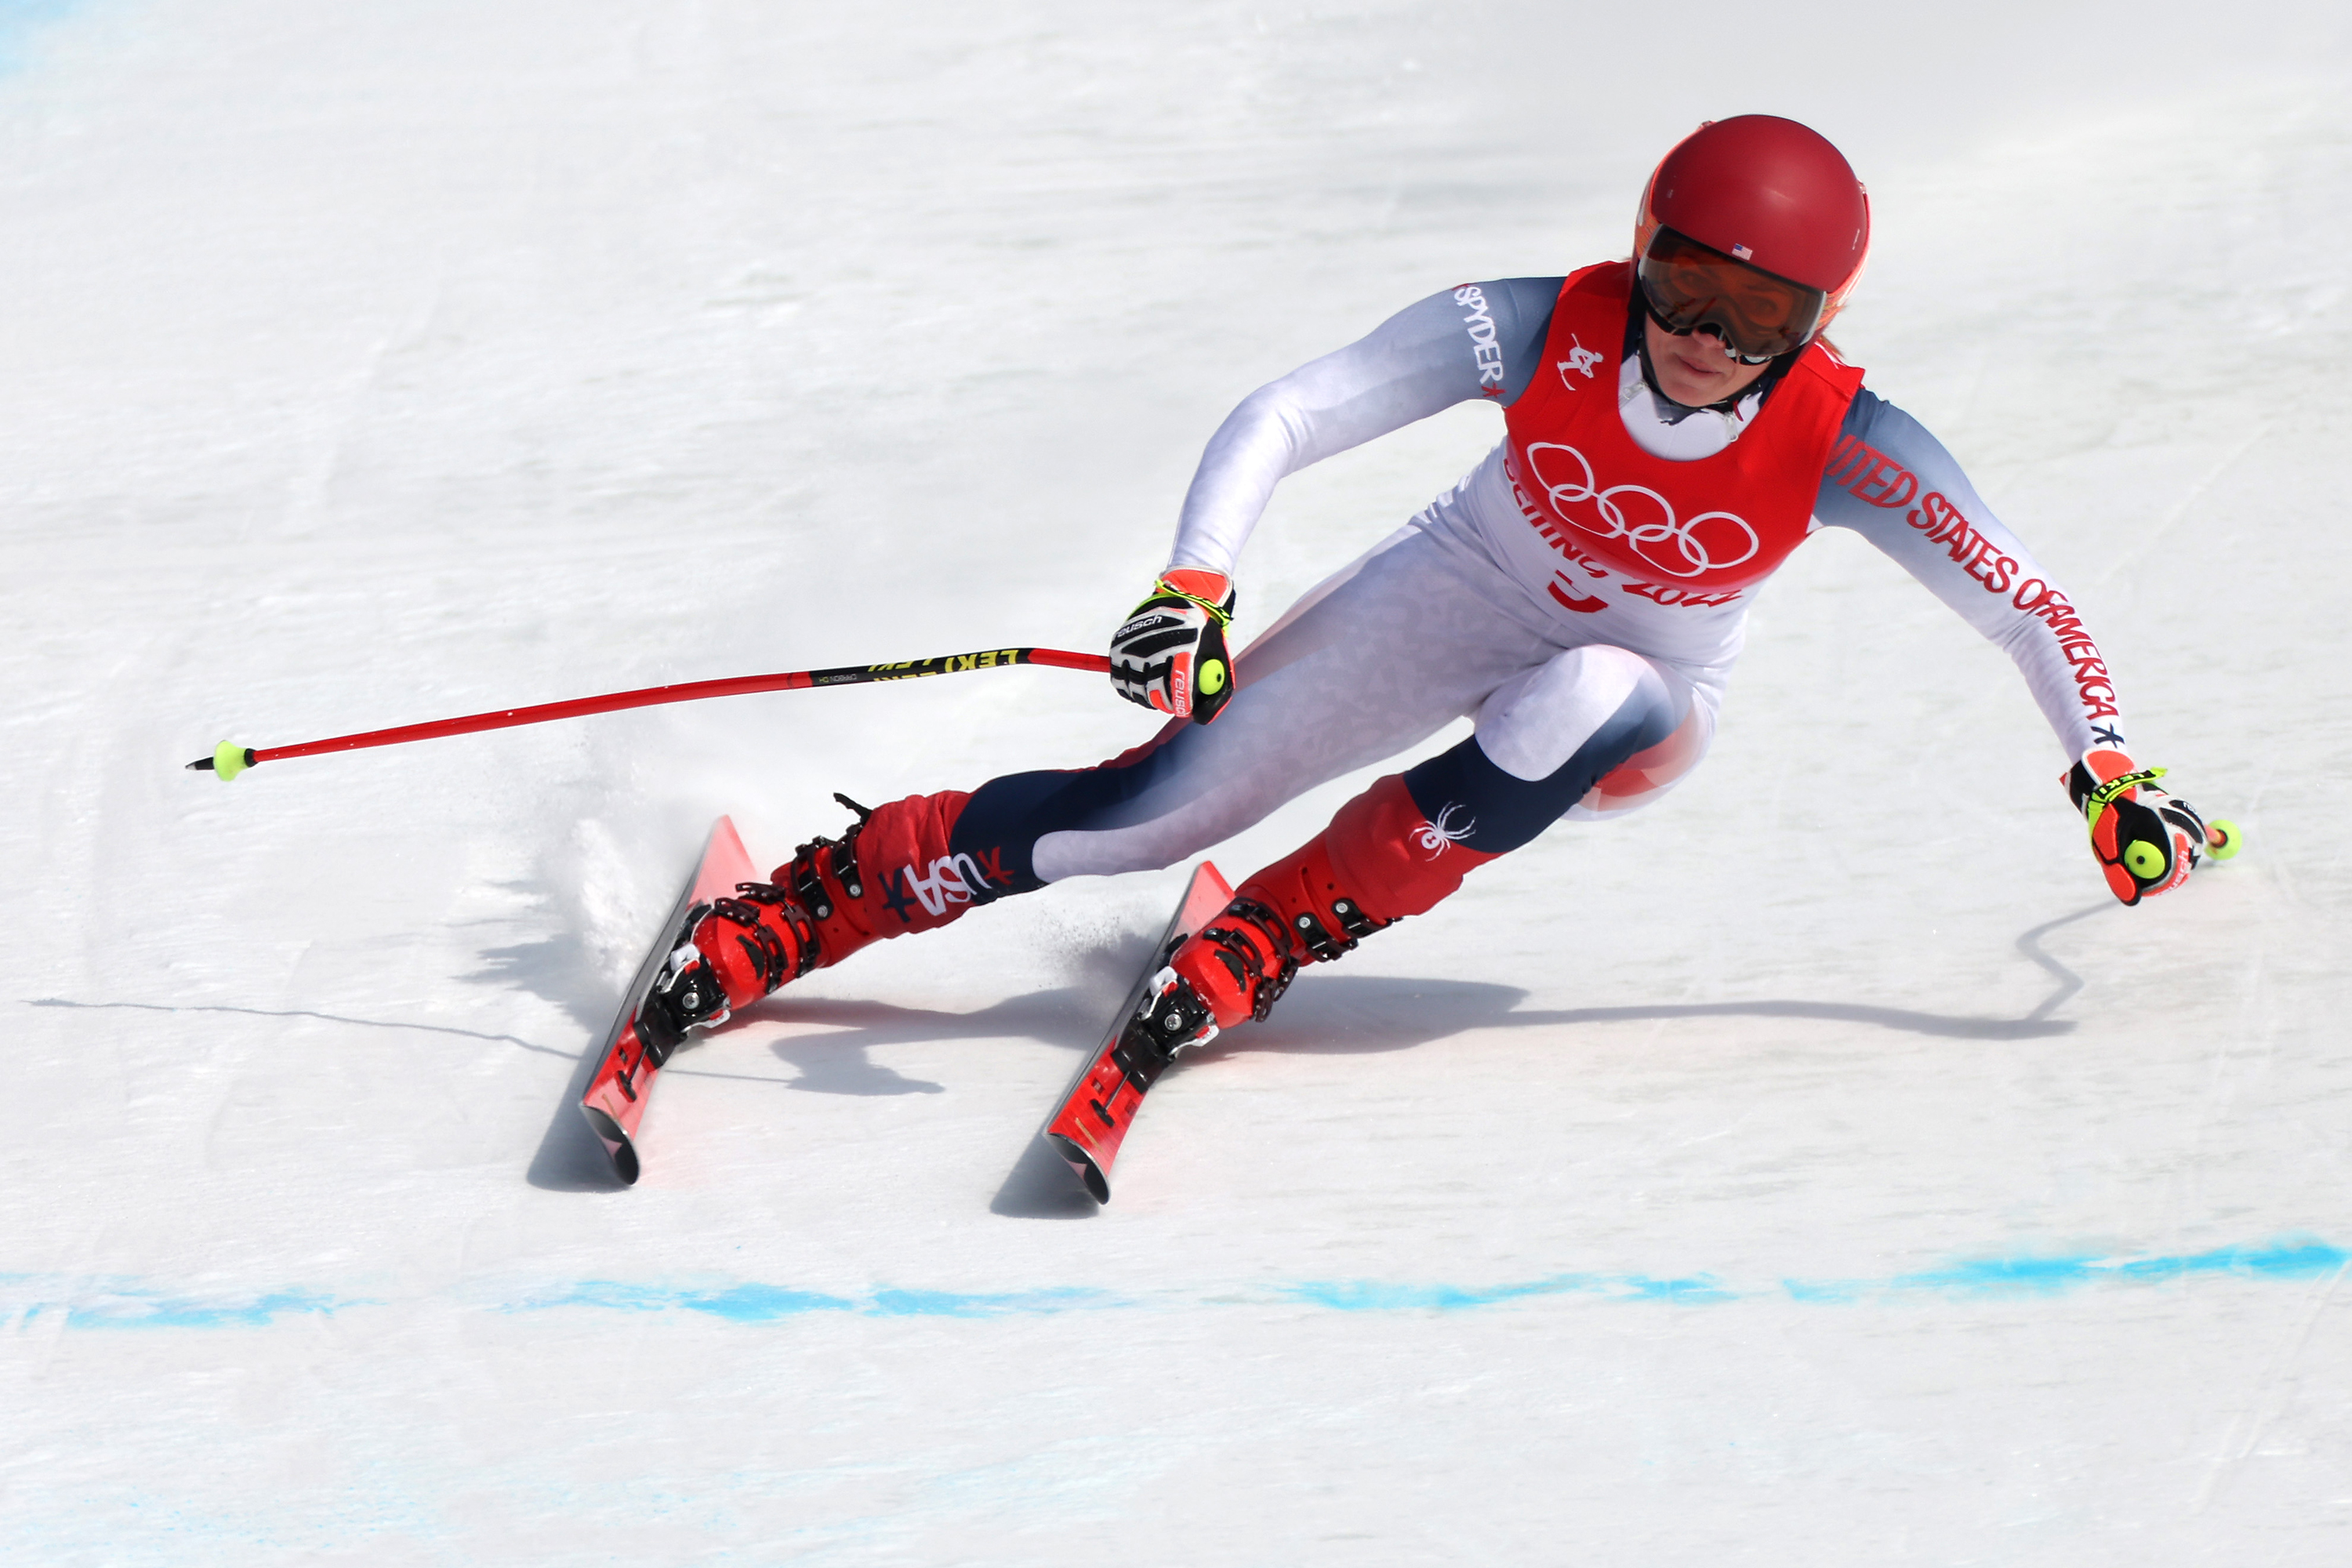 Team USA's Mikaela Shiffrin skis during the women's alpine combined downhill on Thursday.